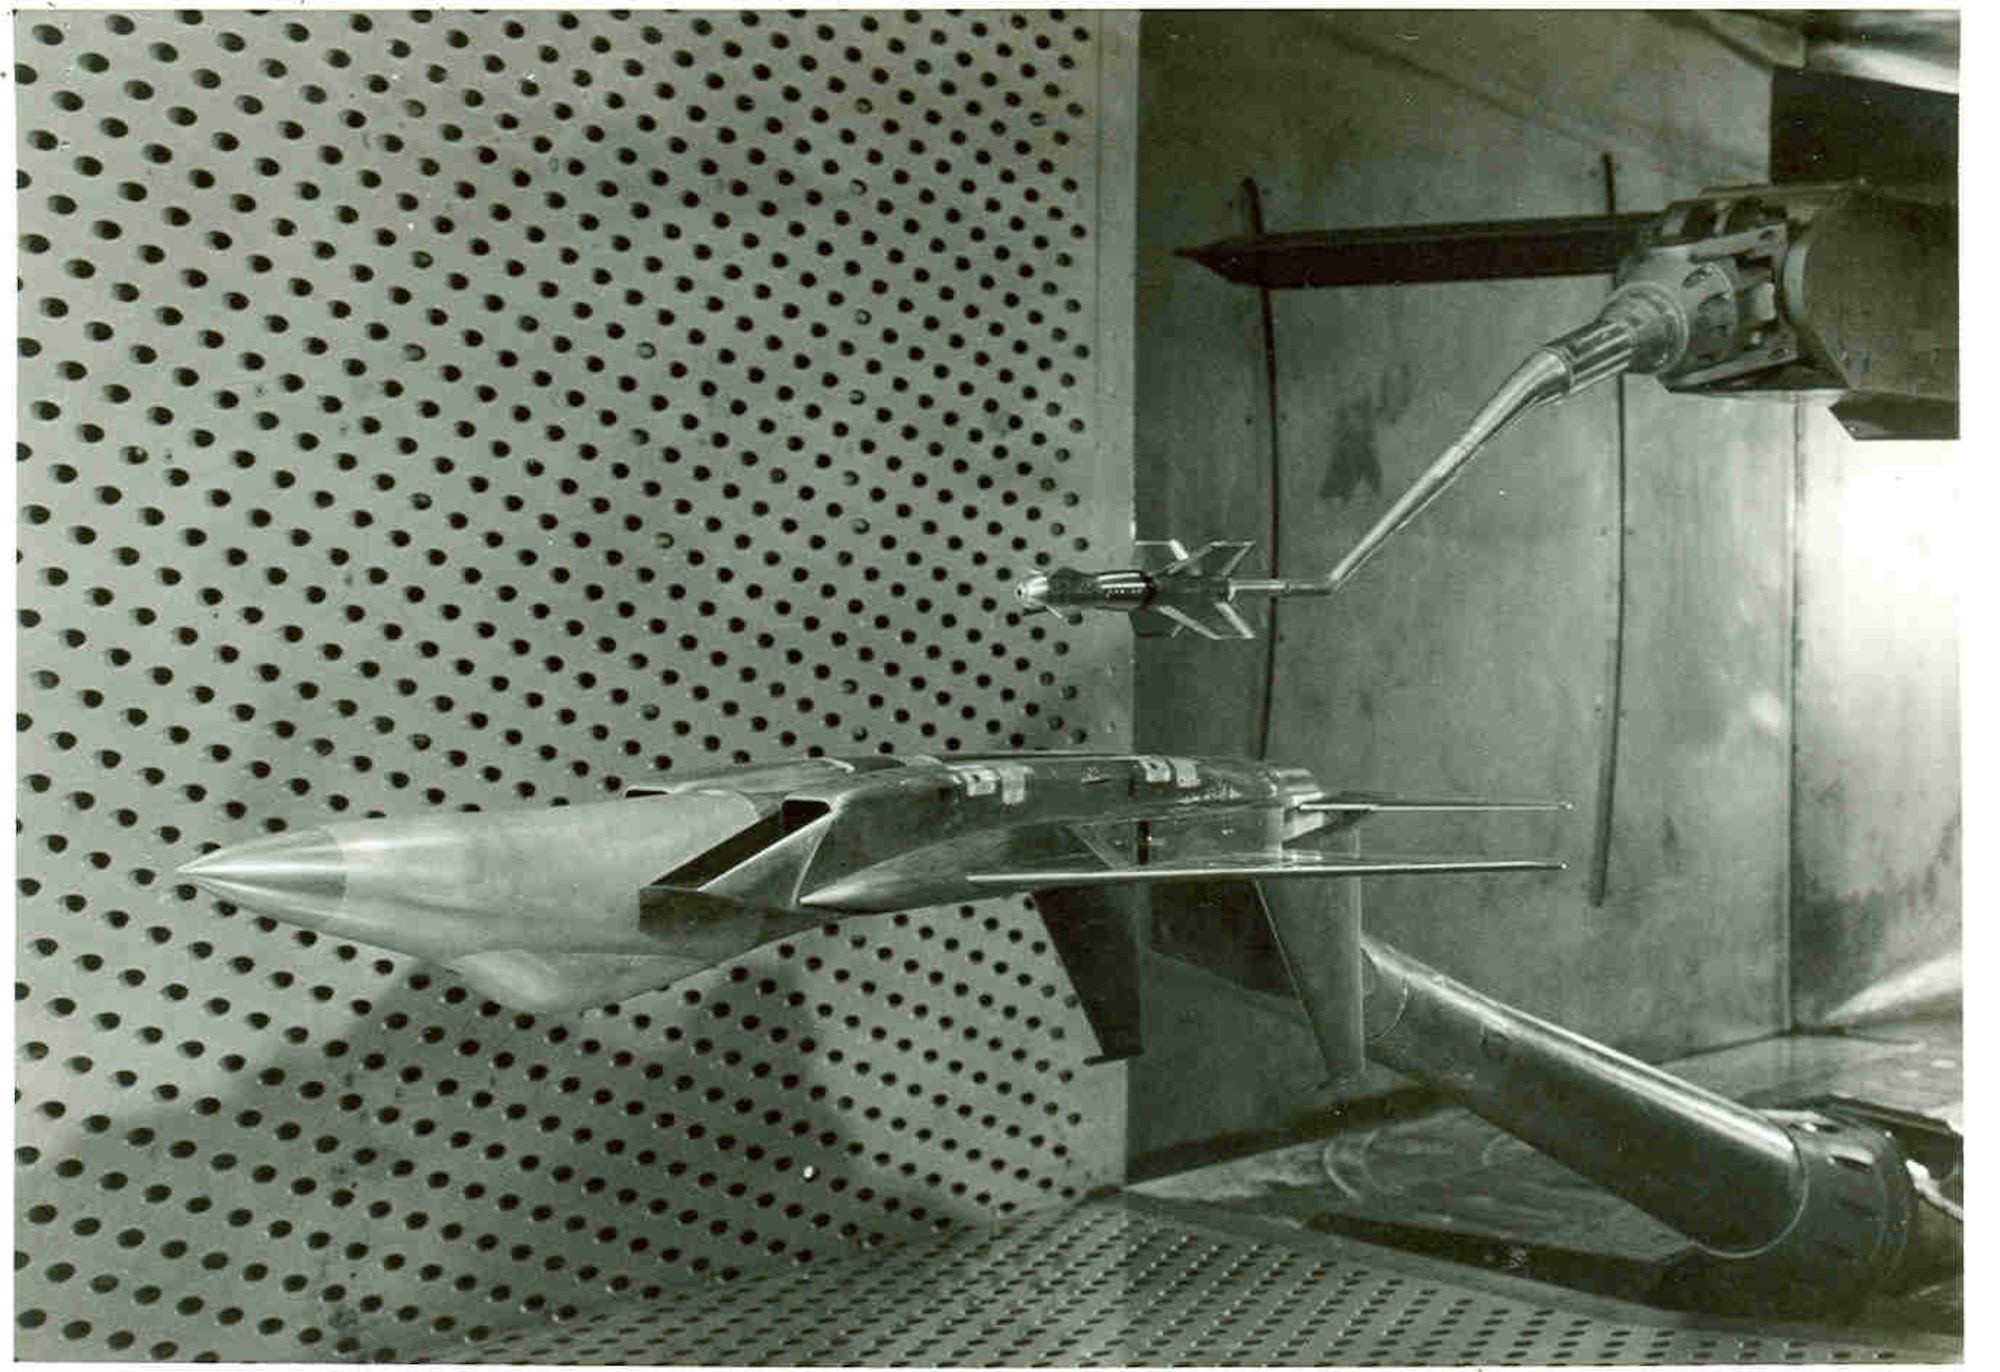 Data for flow field grid surveys are obtained in the early 1980s in the 4-foot transonic wind tunnel at Arnold Air Force Base, Tennessee, headquarters of Arnold Engineering Development Complex, using 5% scale models of the F-15 Eagle and Guided Bomb Unit 15 Cruciform Wing Weapon store, which is mounted on the tunnel’s Captive Trajectory System. The Air Force recently celebrated the 50th anniversary of the F-15’s deployment. Models of the aircraft, engines and other F-15 components have frequently been tested by AEDC over the past 50 years. (U.S. Air Force photo)